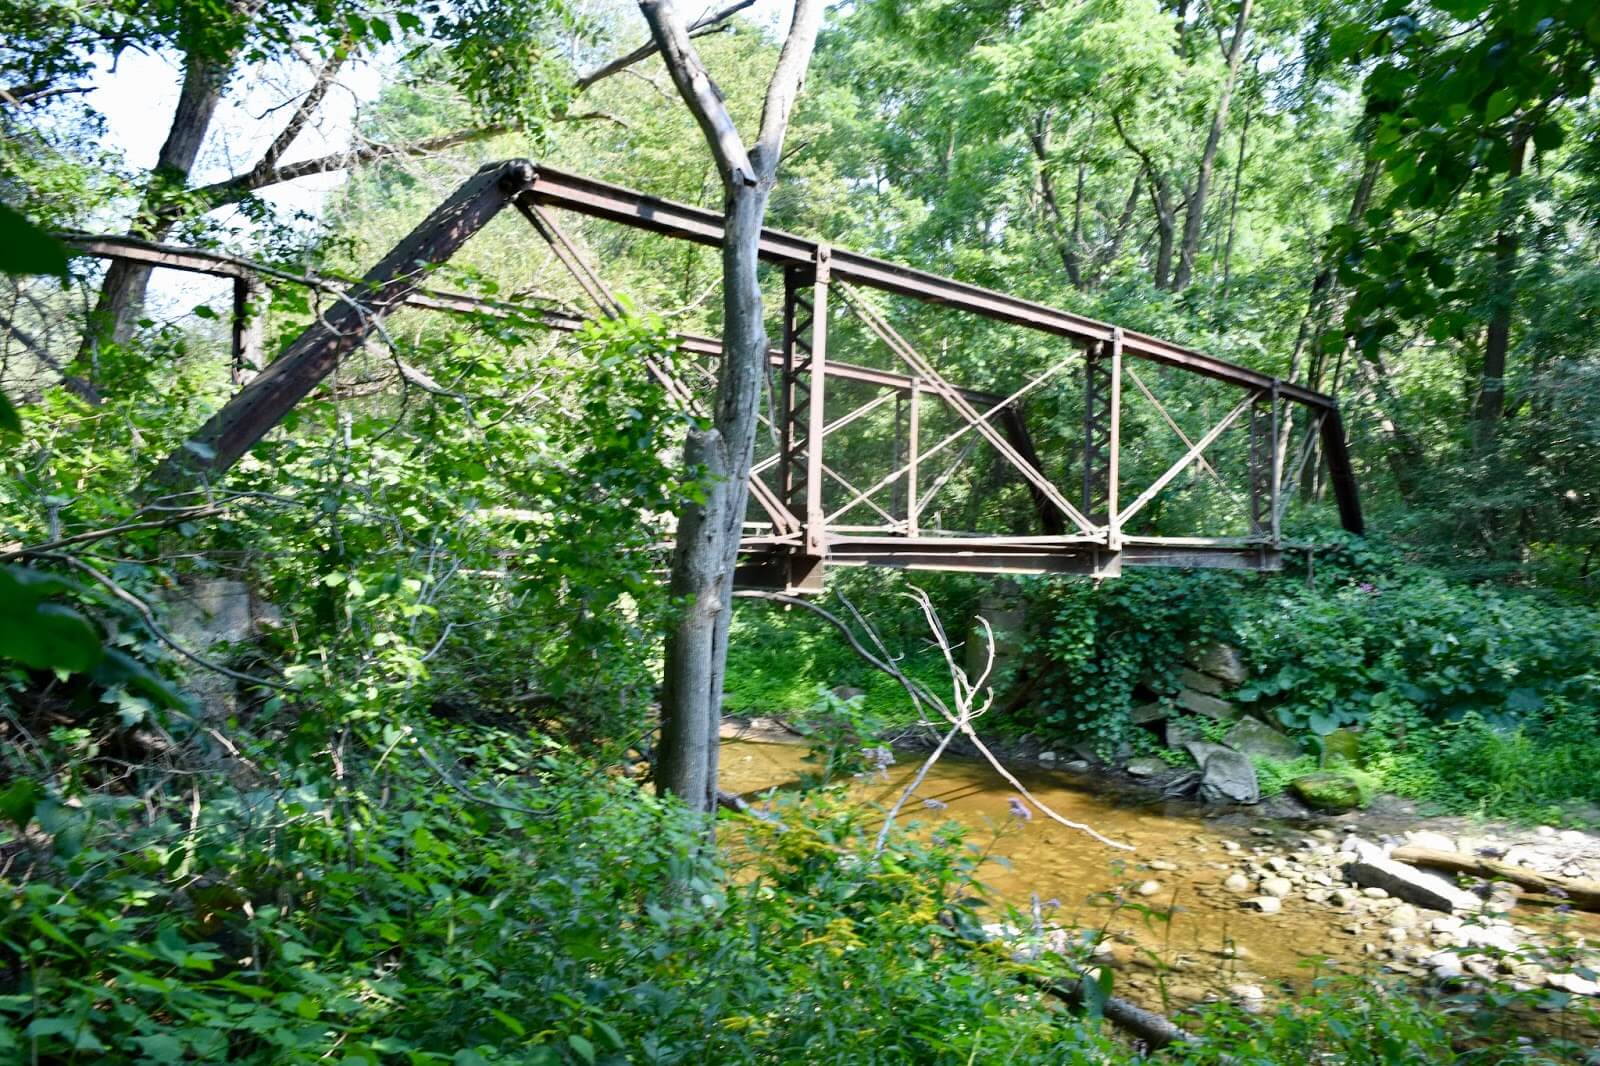 A truss bridge in a forest over a river